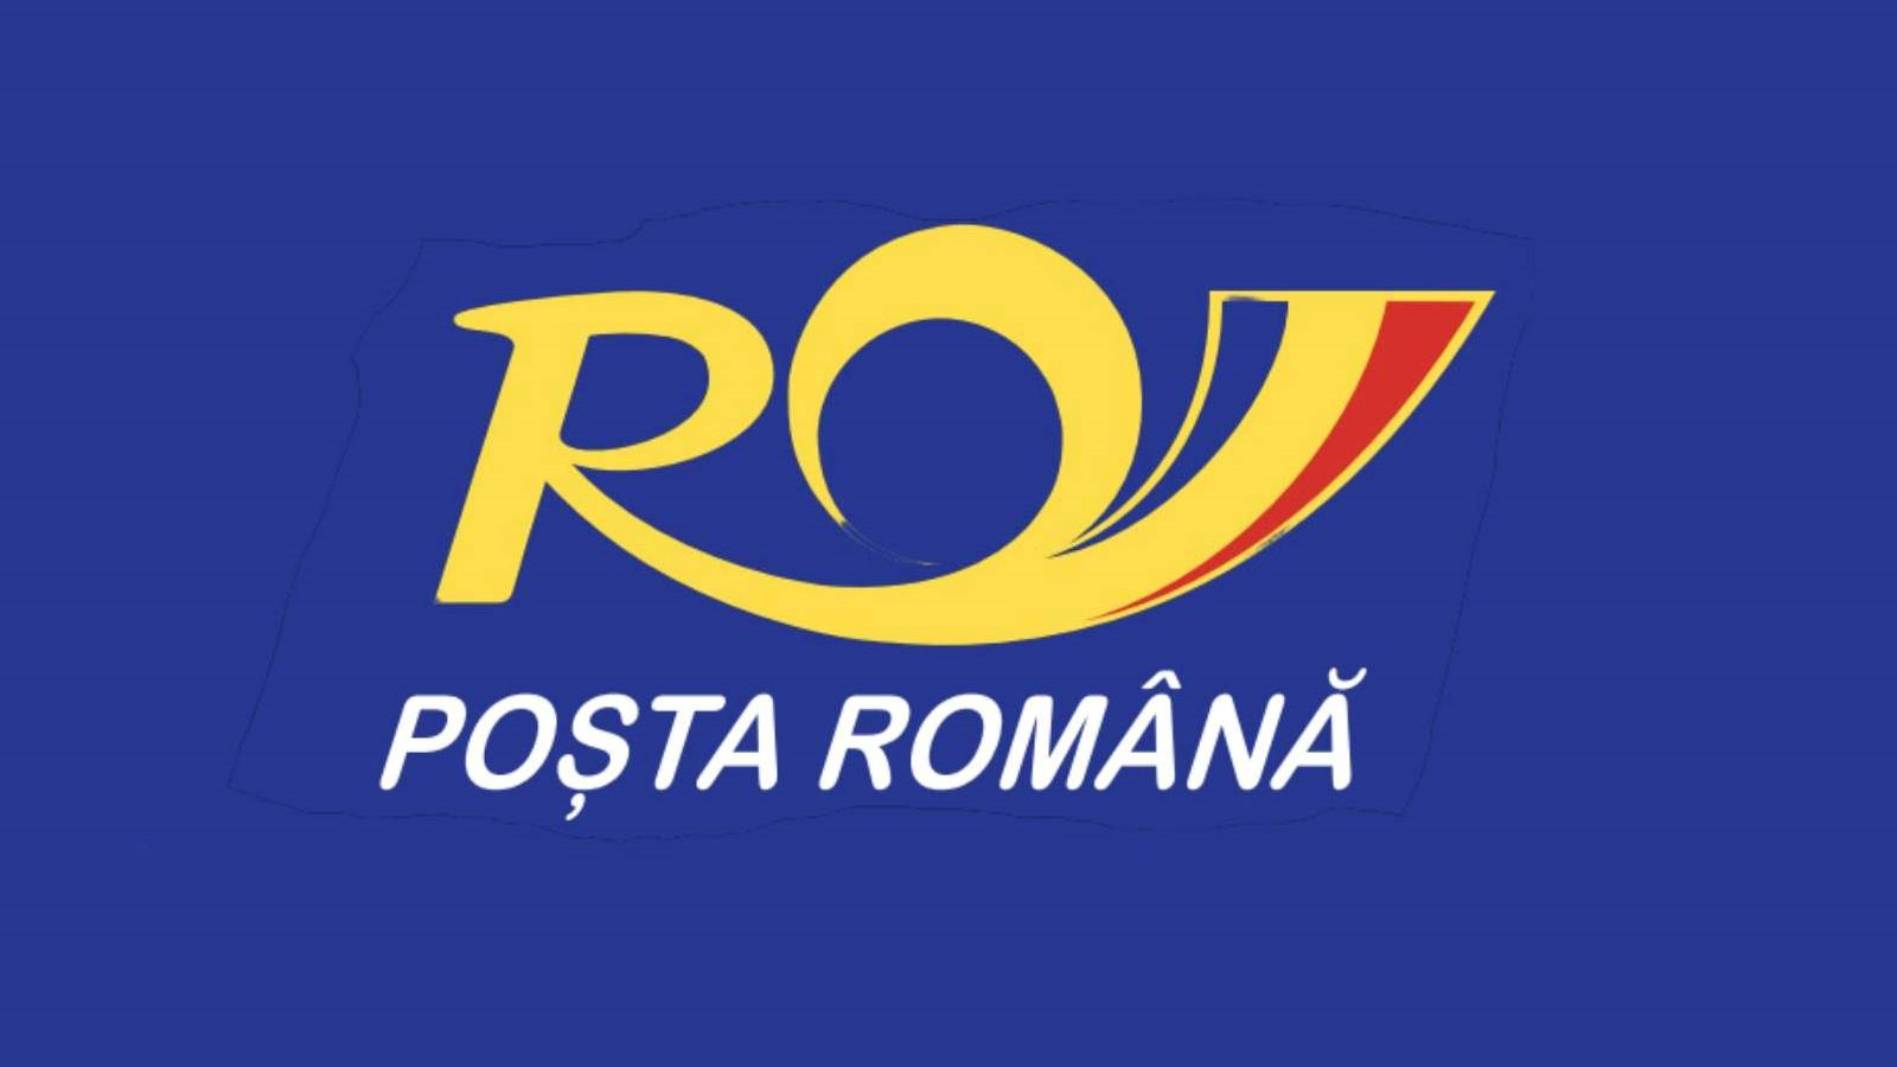 The Romanian Post Announces the Extension of the Validity of Energy Cards